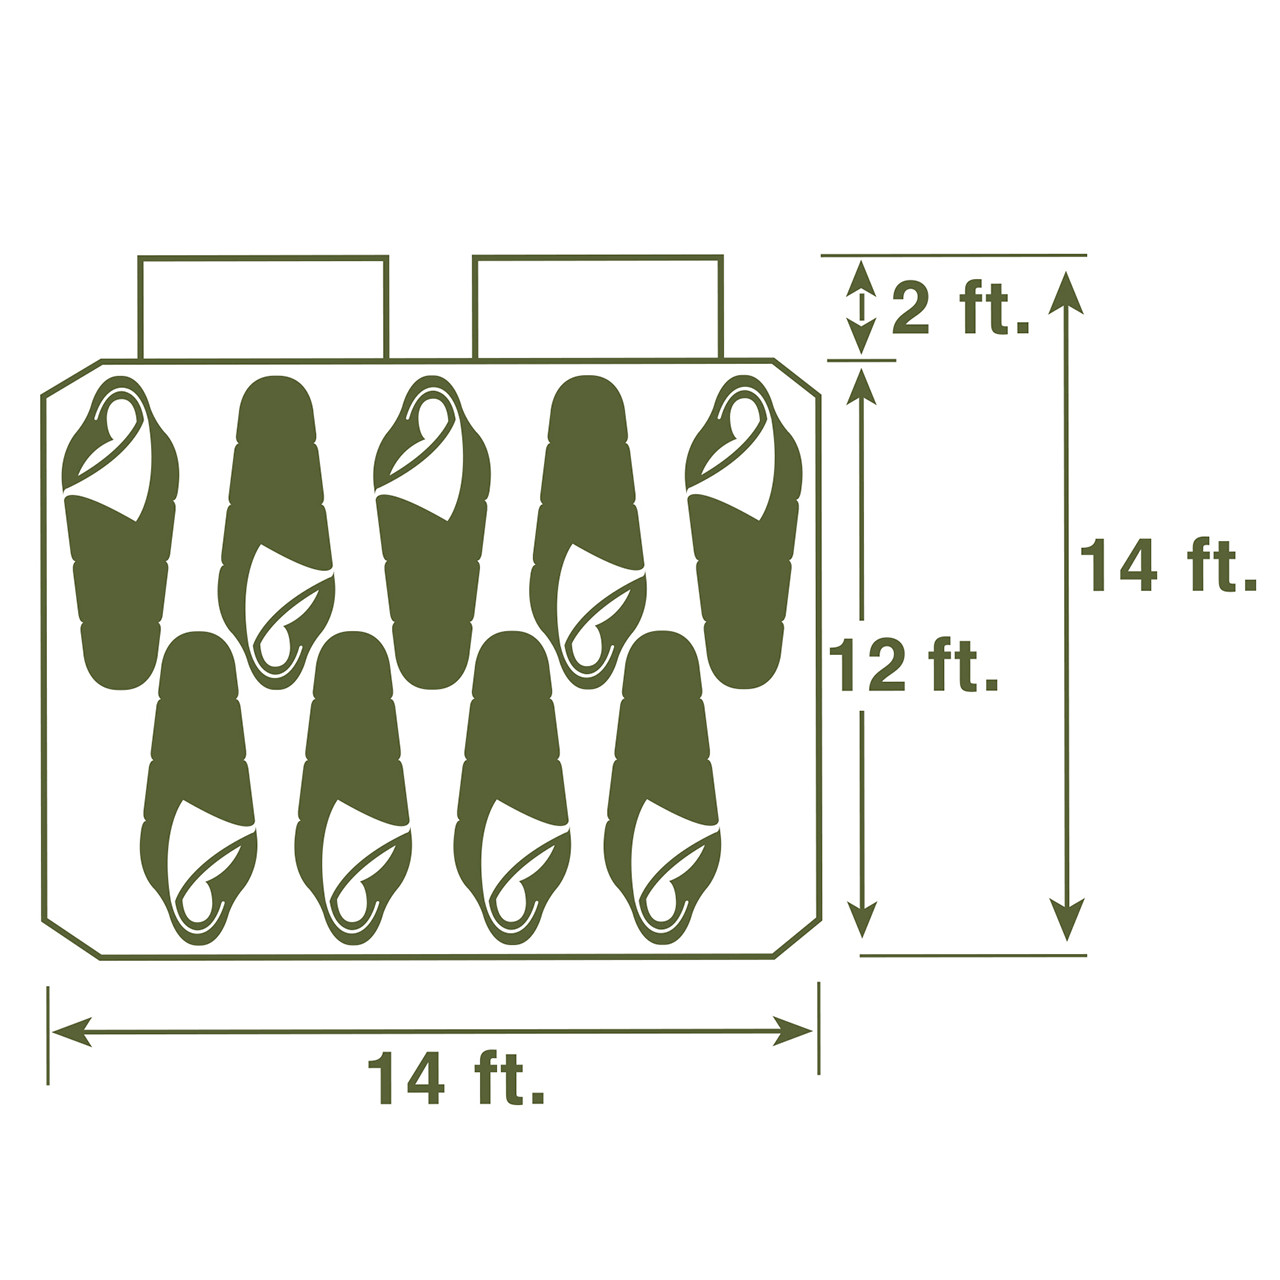 Diagram of the floor sleeping plan for the Wenzel Kodiak 9 tent with people in sleeping bags to illustrate how to arrange 9 people